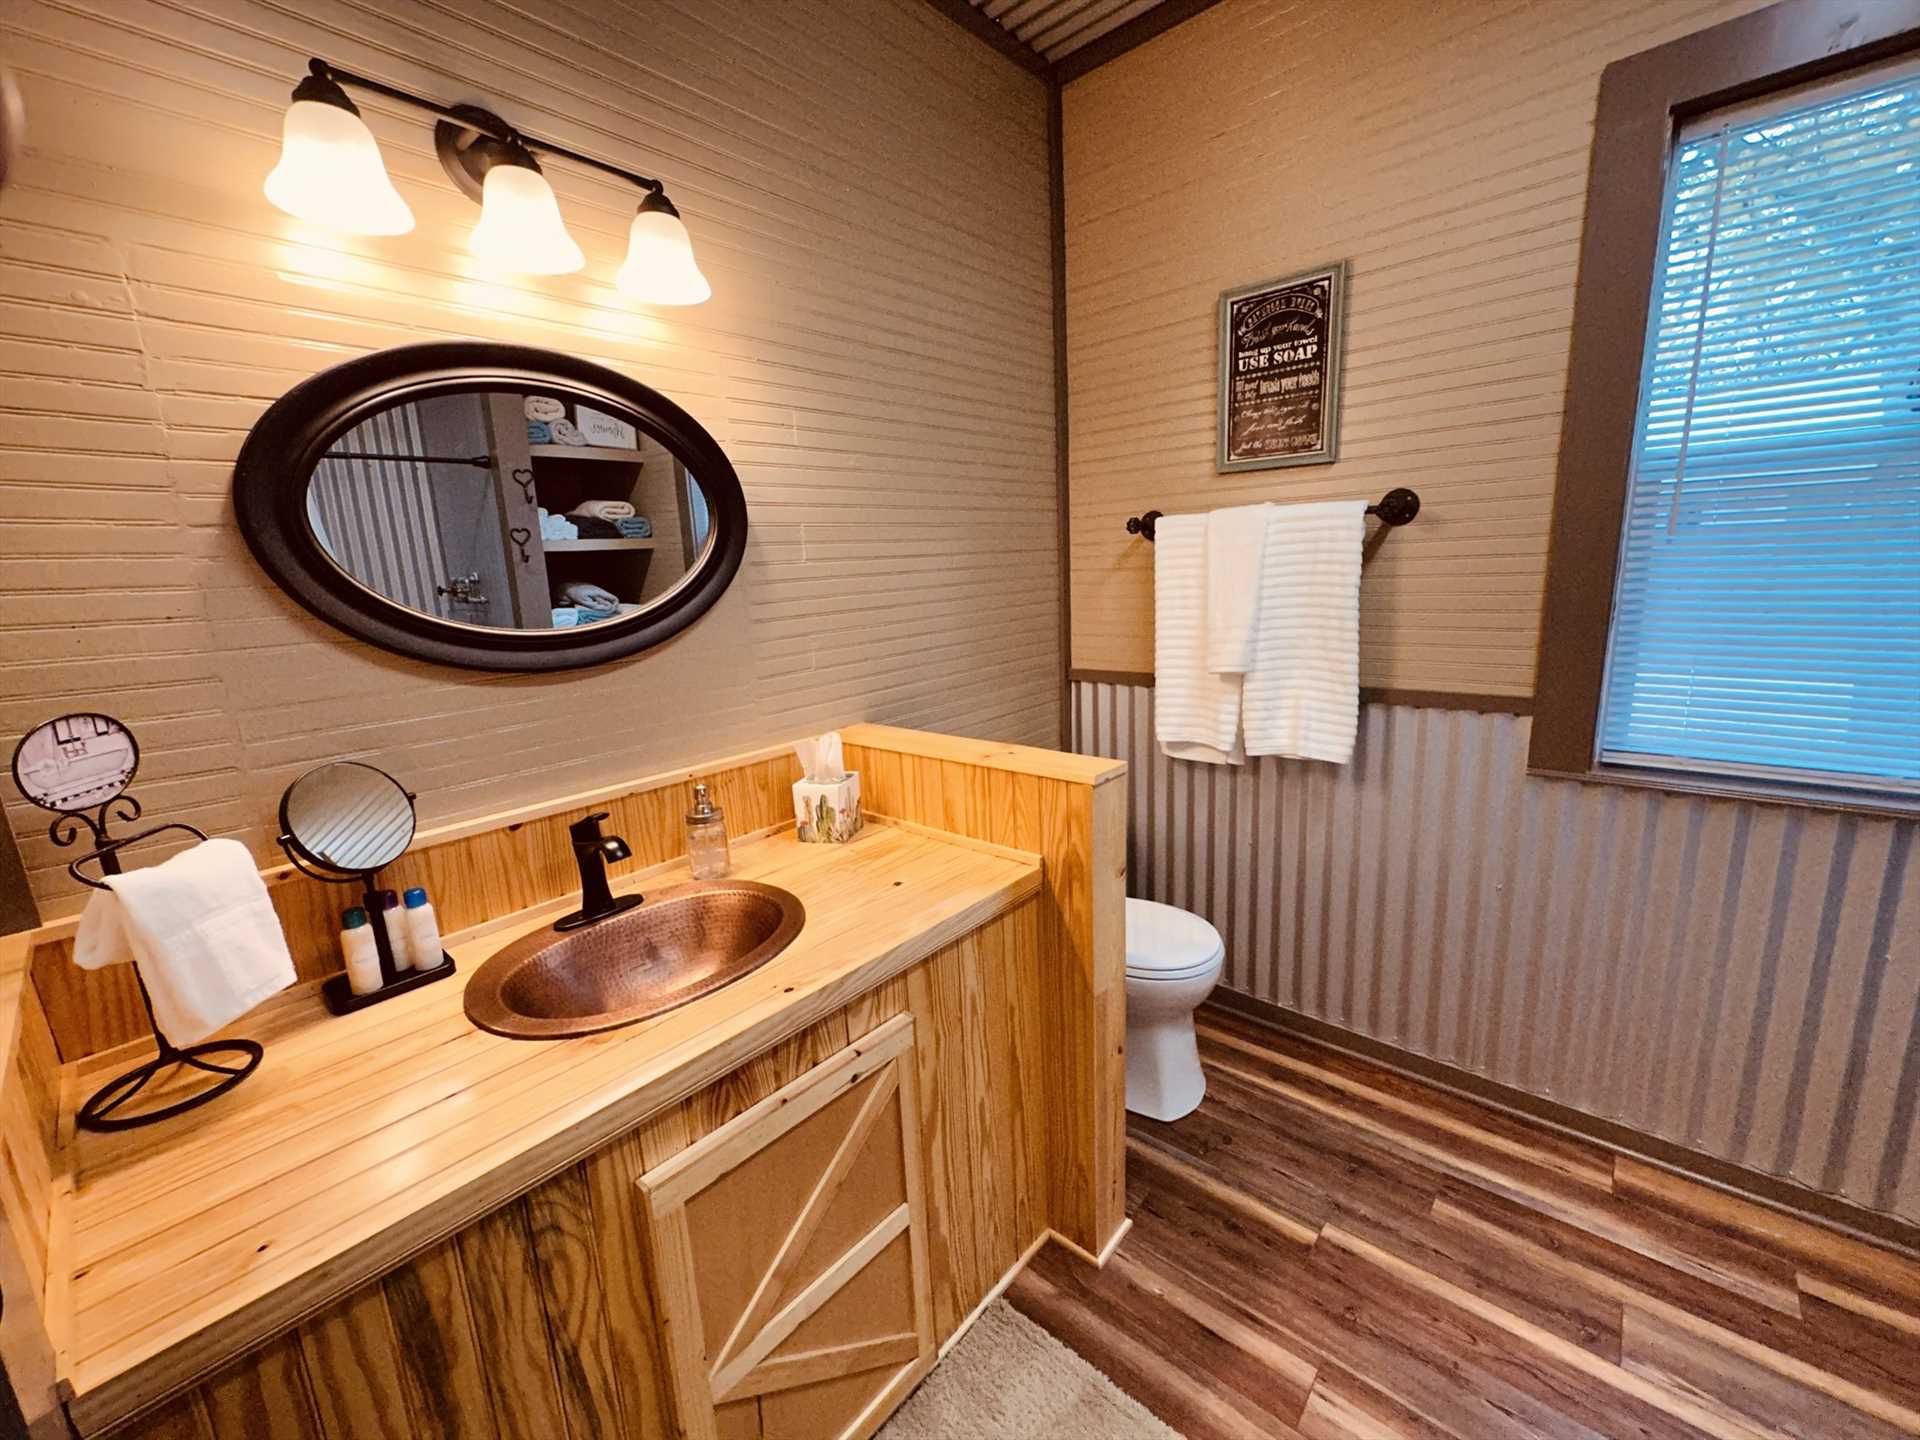                                                 A roomy vanity and tastefully-contrasting woodwork highlight the newly-remodeled full bath at the Texas Blue Apple Cottage.